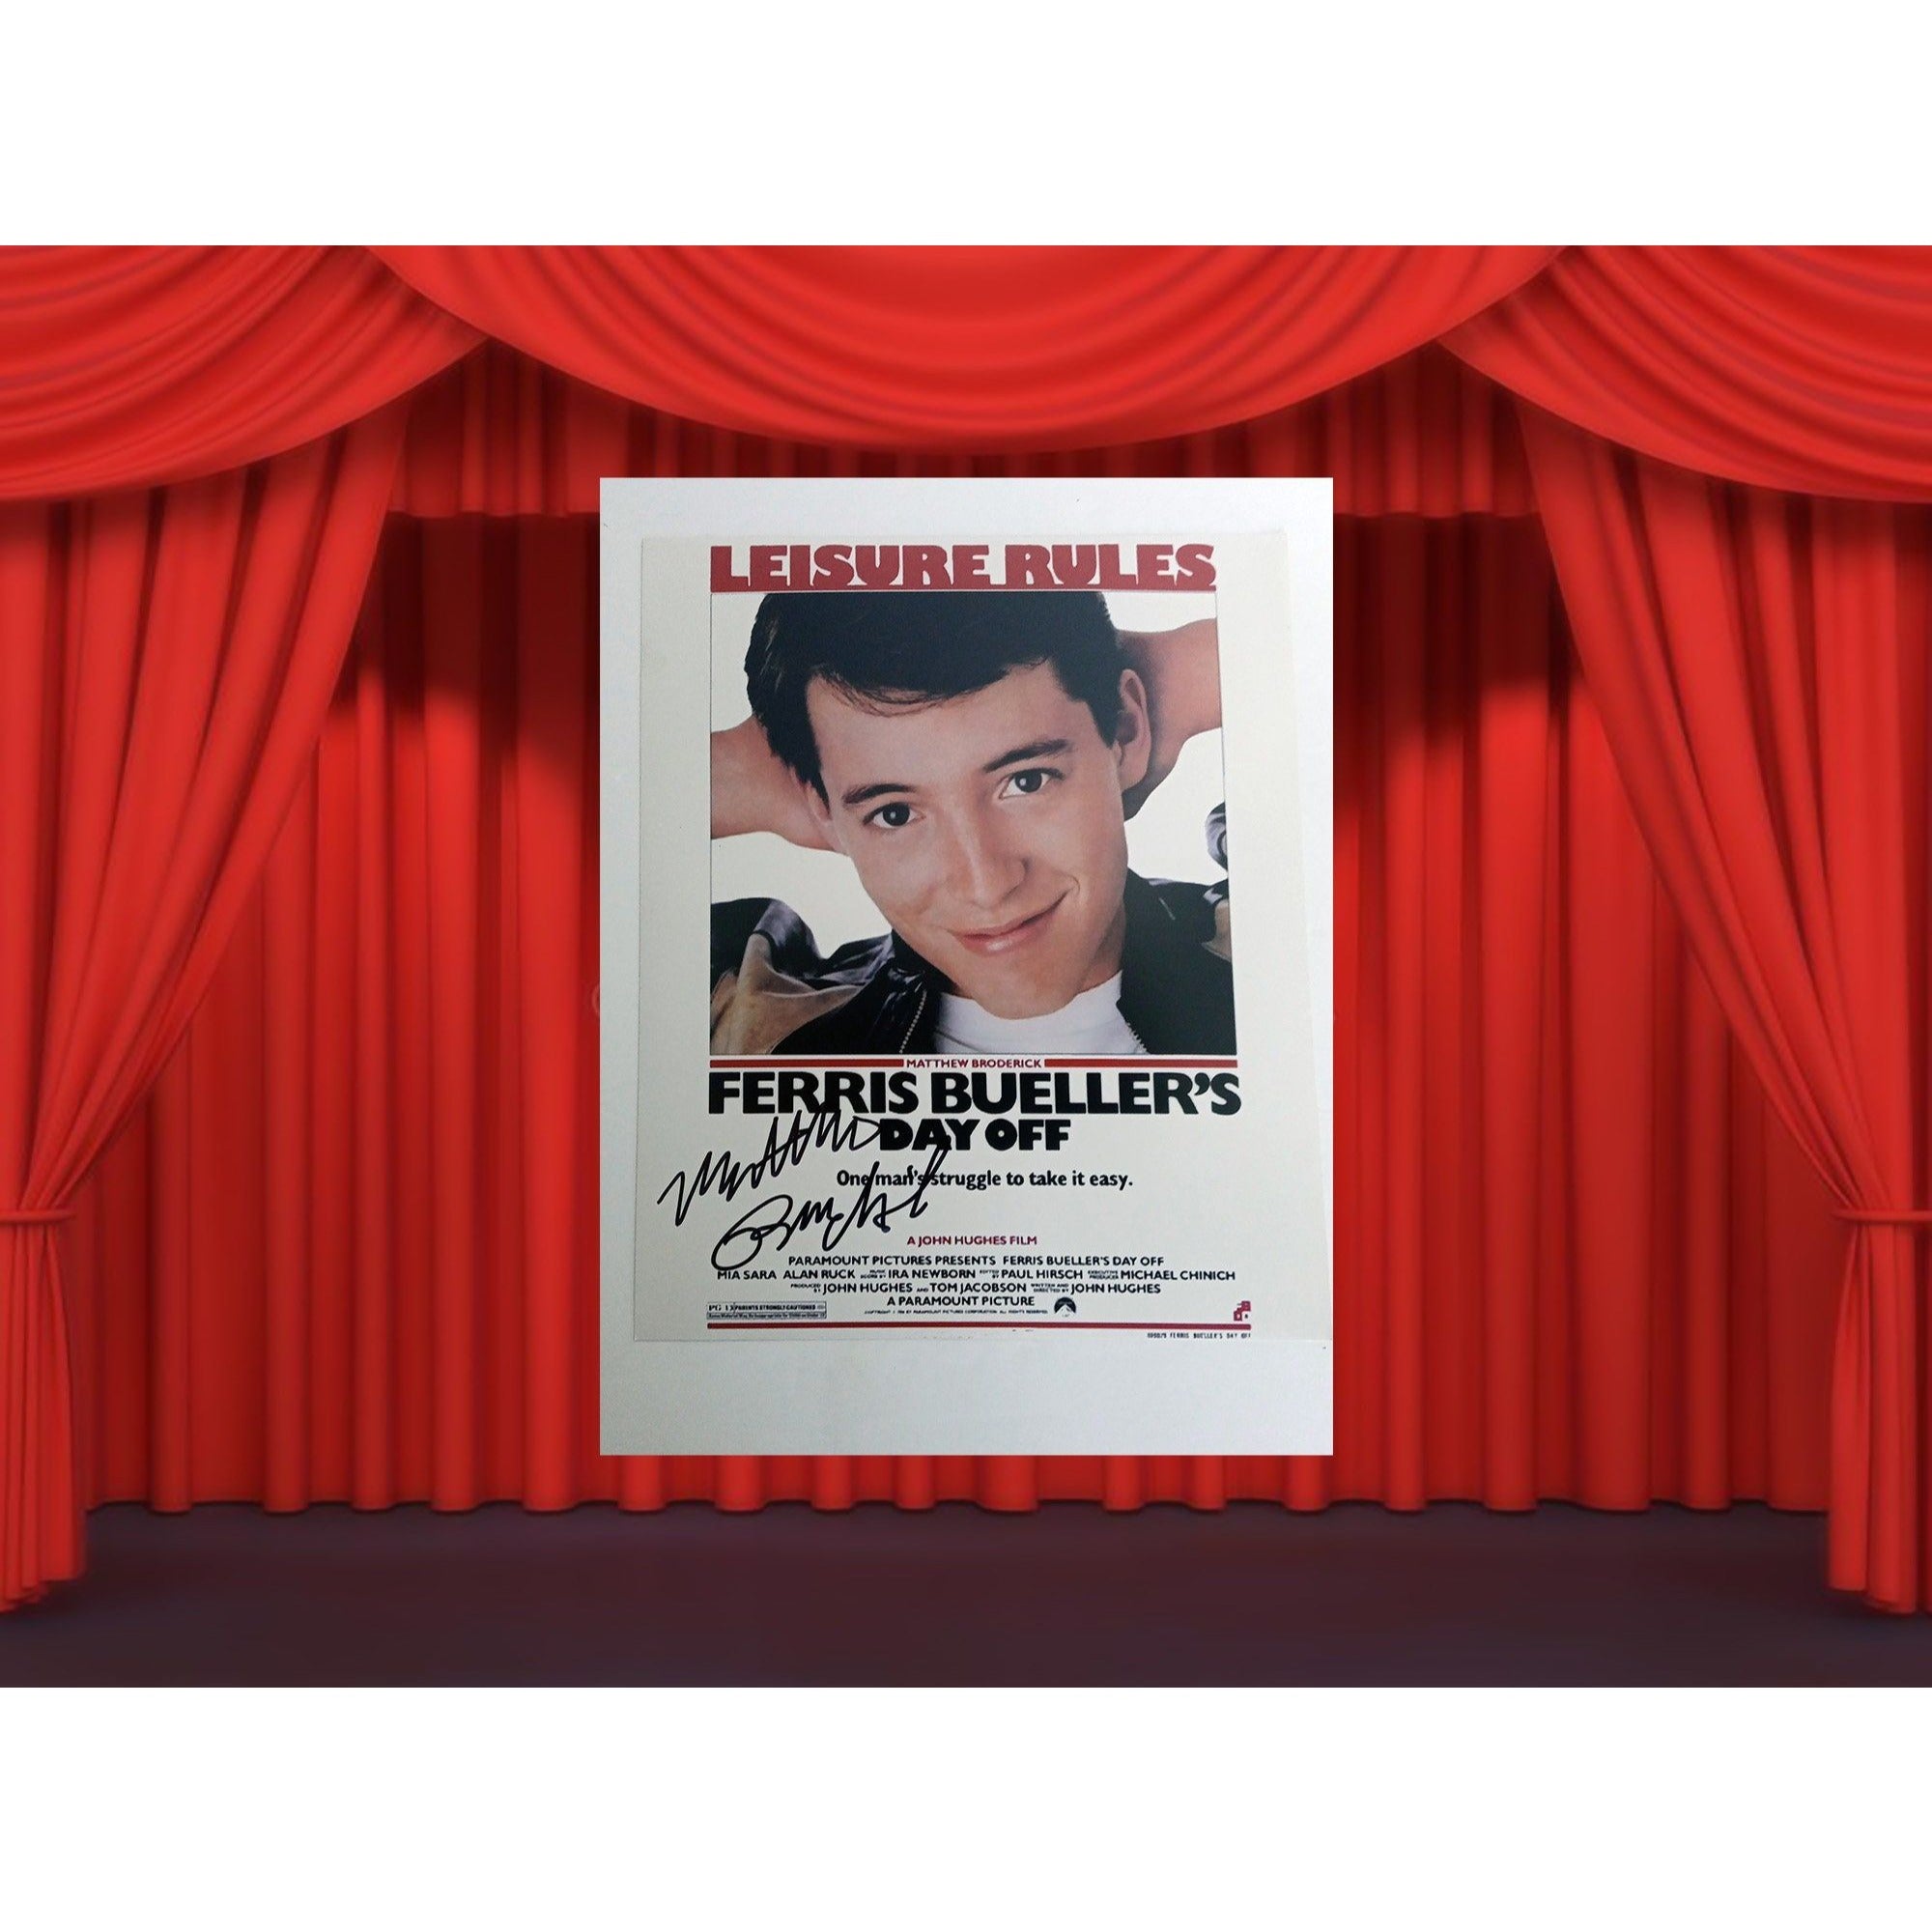 Ferris Bueller's Day Off Matthew Broderick 8 by 10 signed photo with proof